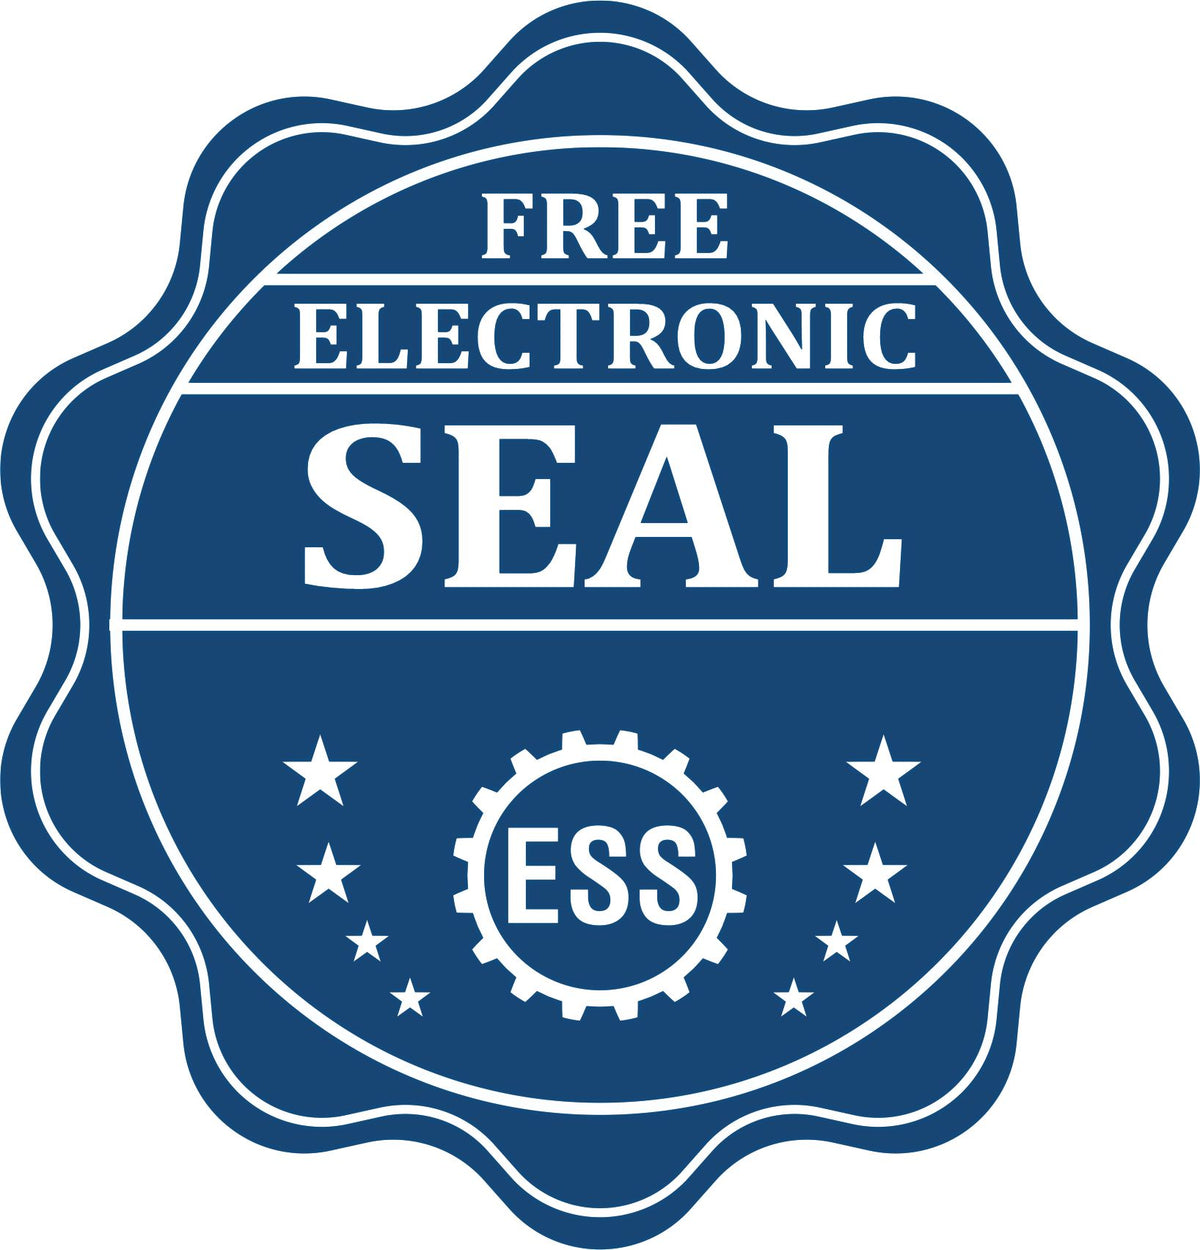 A badge showing a free electronic seal for the Hybrid Oklahoma Land Surveyor Seal with stars and the ESS gear on the emblem.